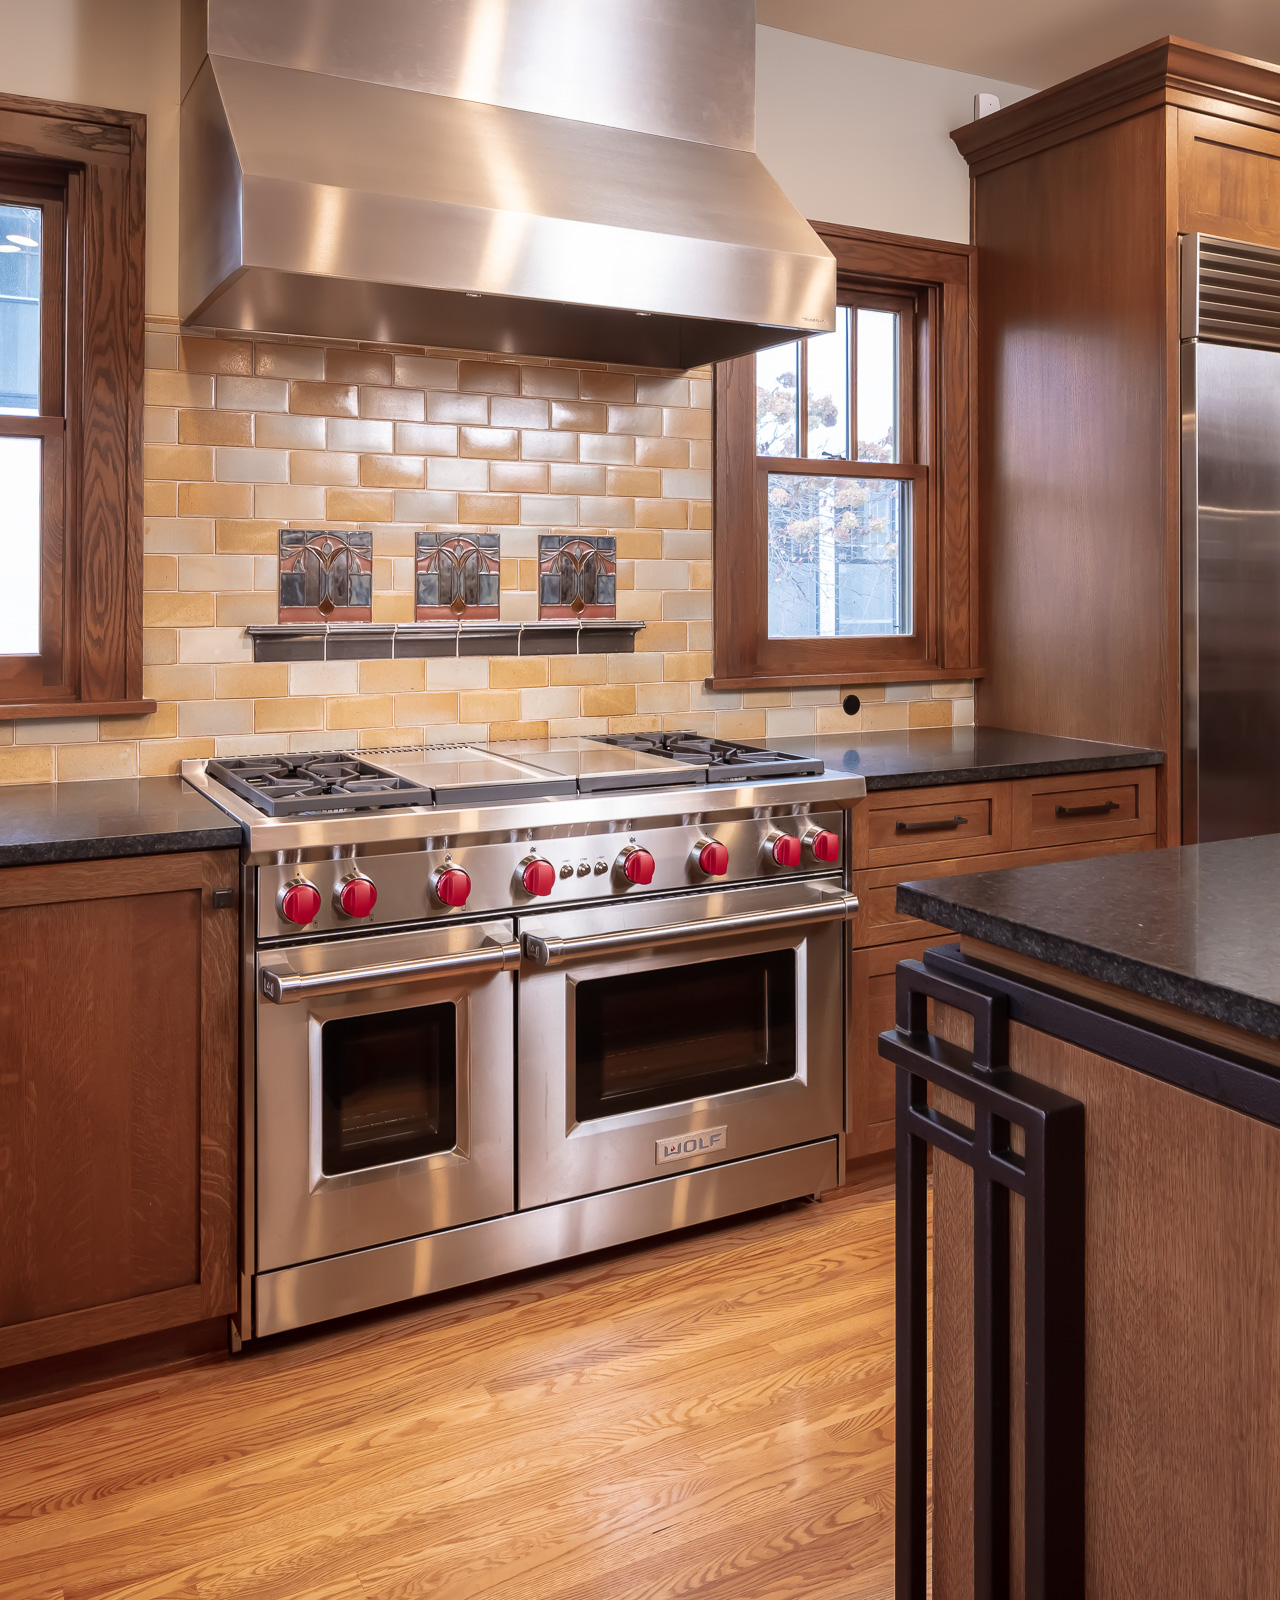 Modern Elegance Meets Historic Charm: Craftsman style kitchen remodel.   Features large square island and L-shaped plan; melds elegance and function into historic architecture.